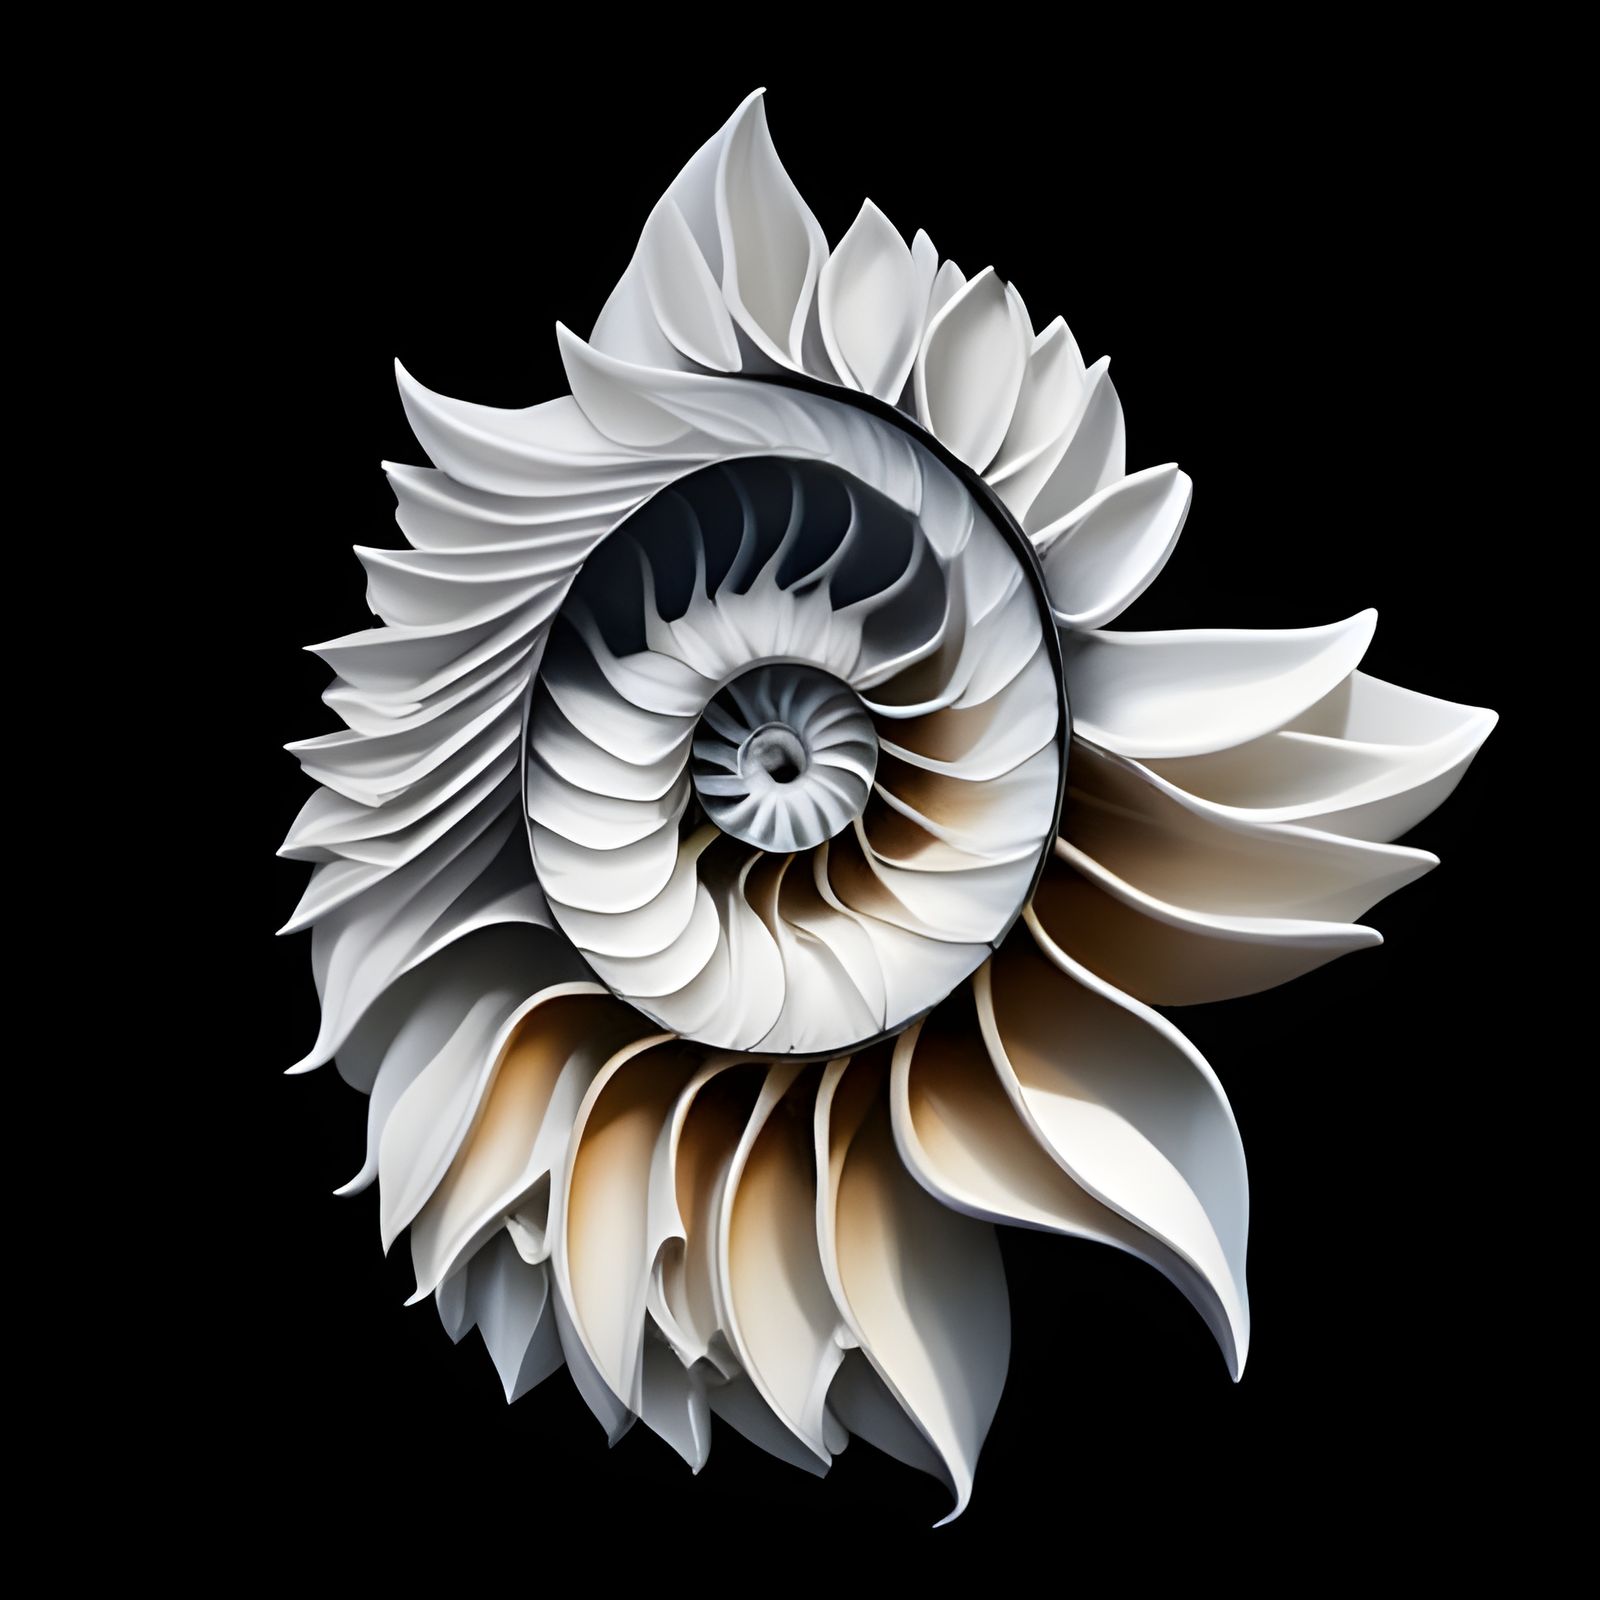 The Nautilus Shell is the popular iconic image for a logarithmic spiral ...